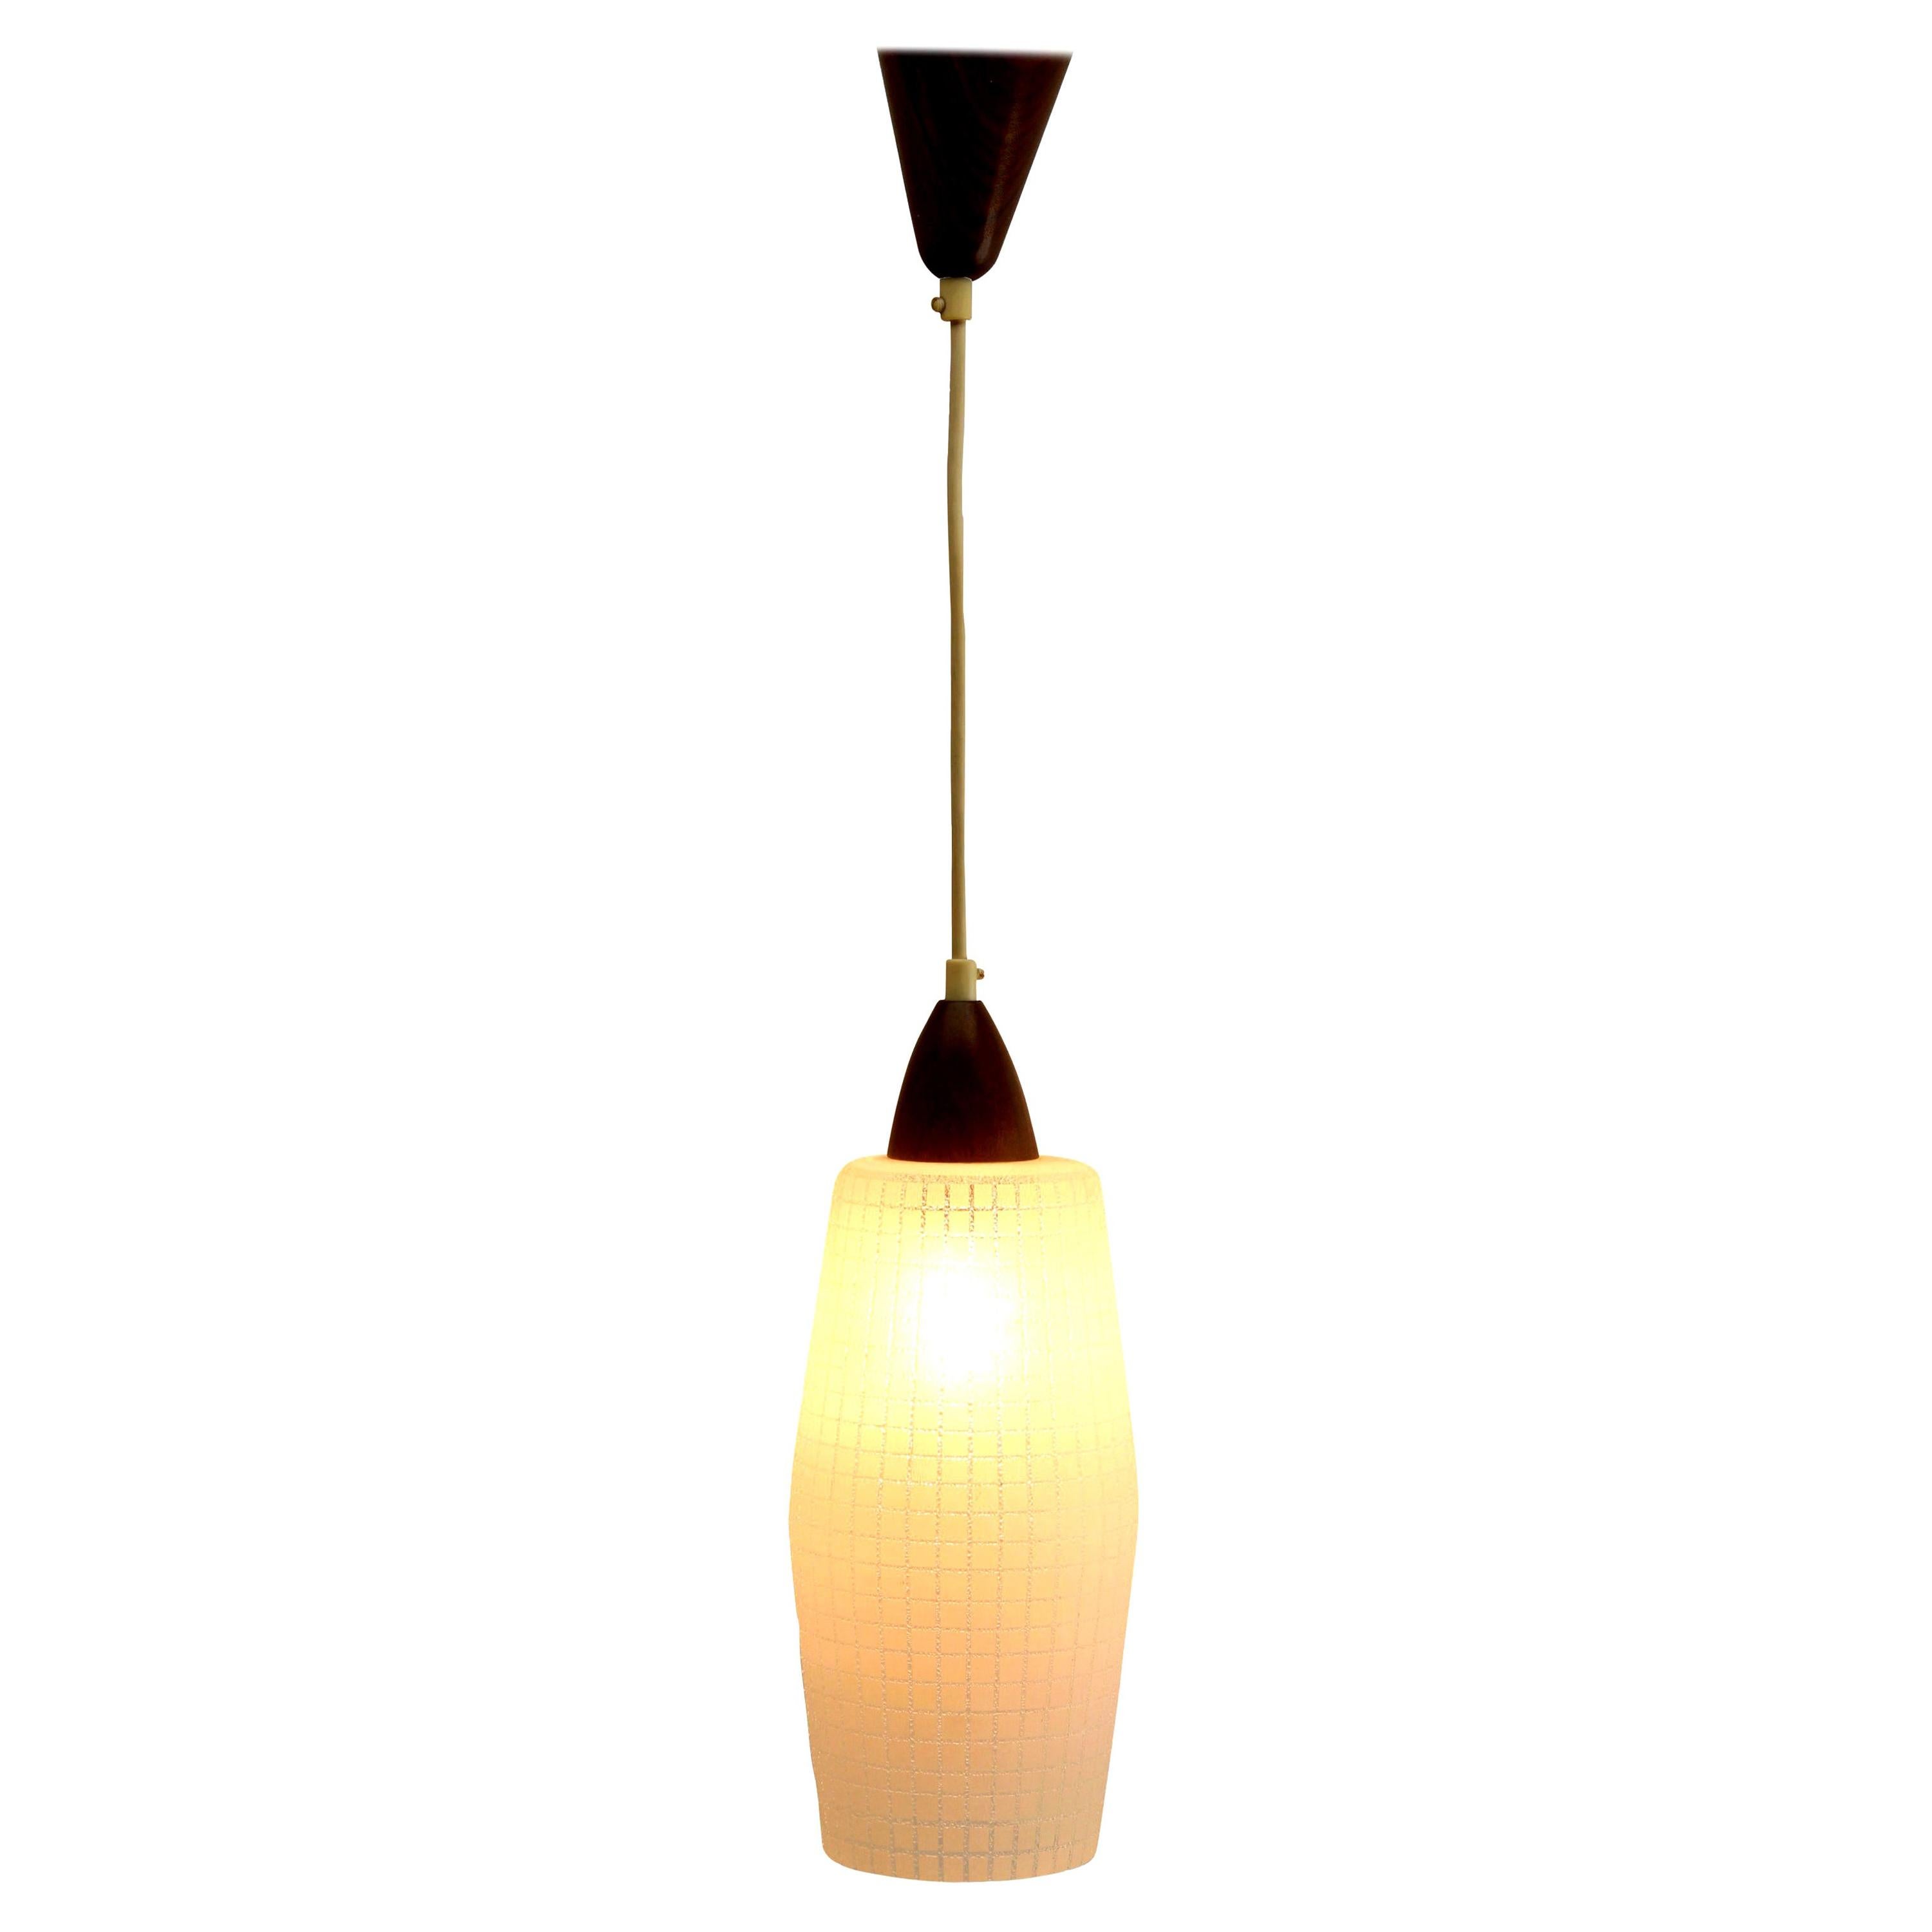 Midcentury Single Pendant Light, Teak with Frosted Optical Shade